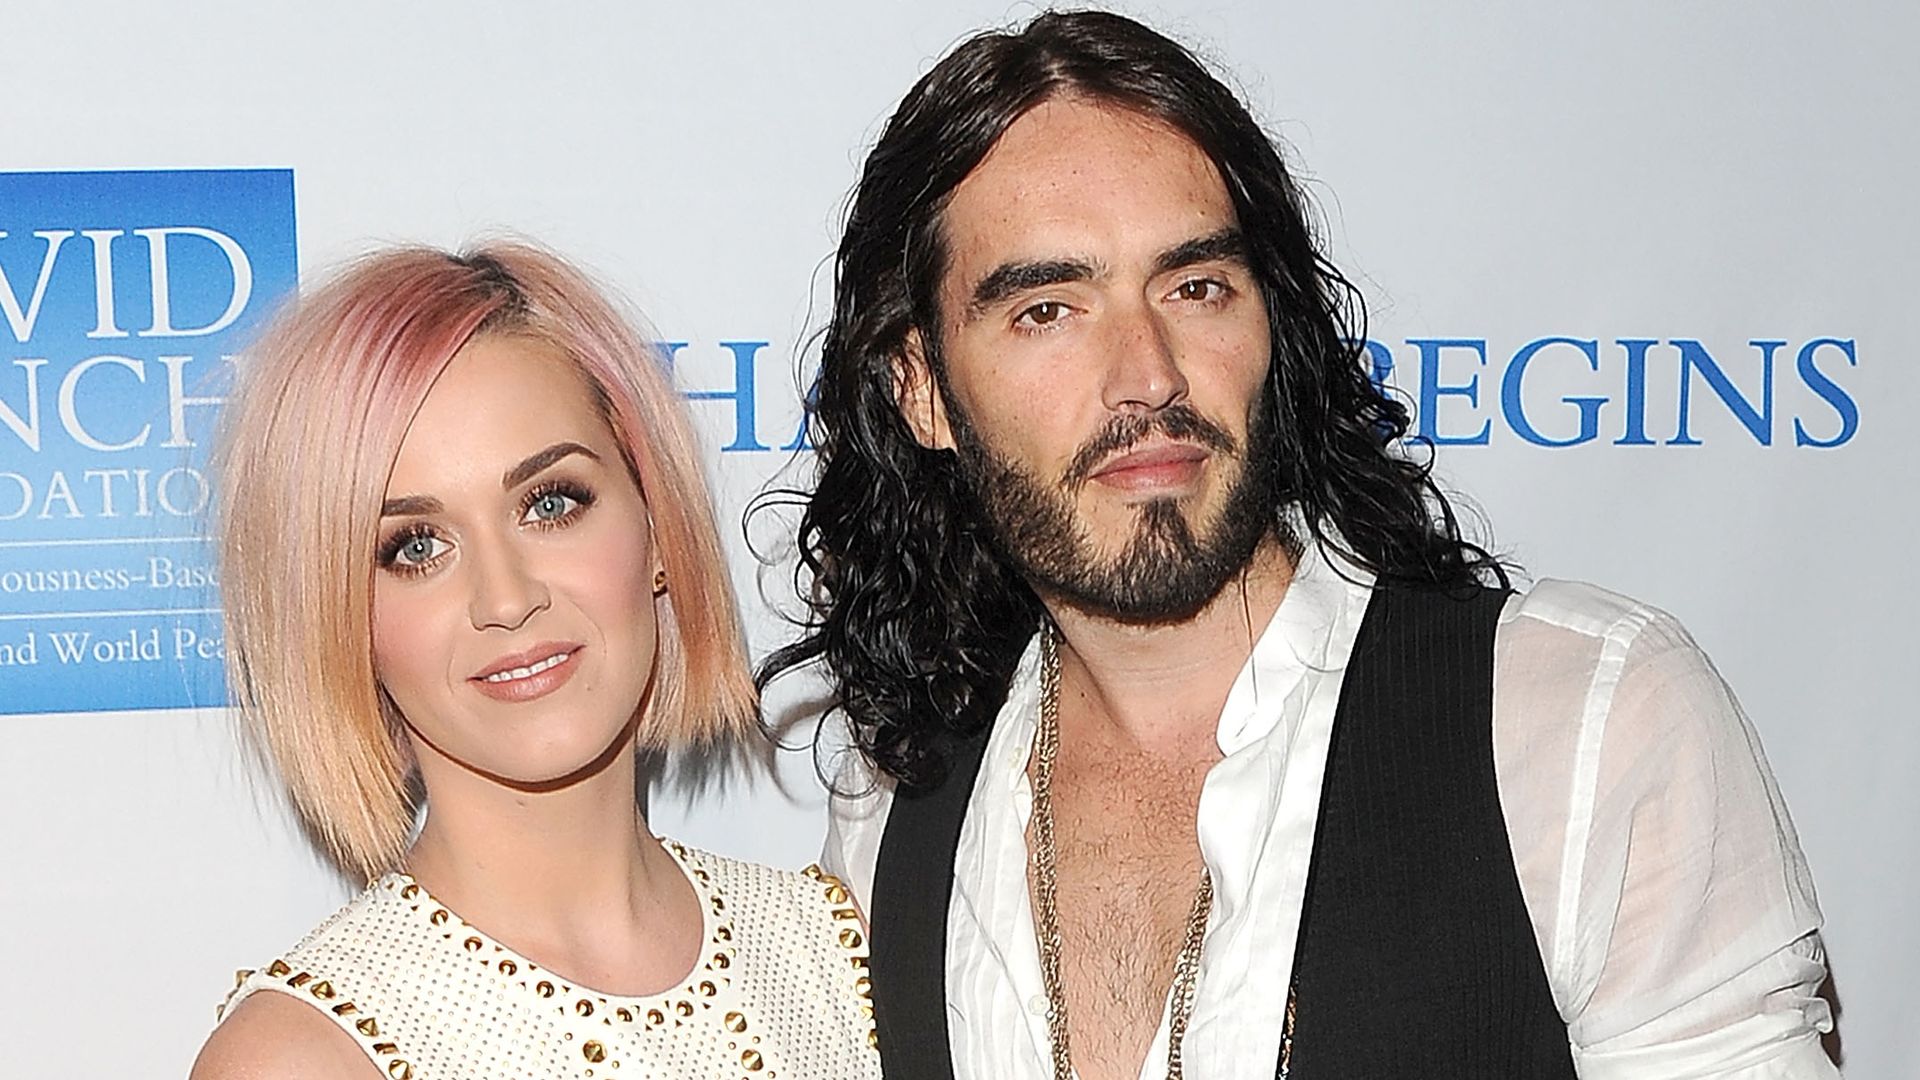 Katy and actor Russell Brand attend the 3rd Annual "Change Begins Within" Benefit Celebration presented by The David Lynch Foundation held at LACMA on December 3, 2011